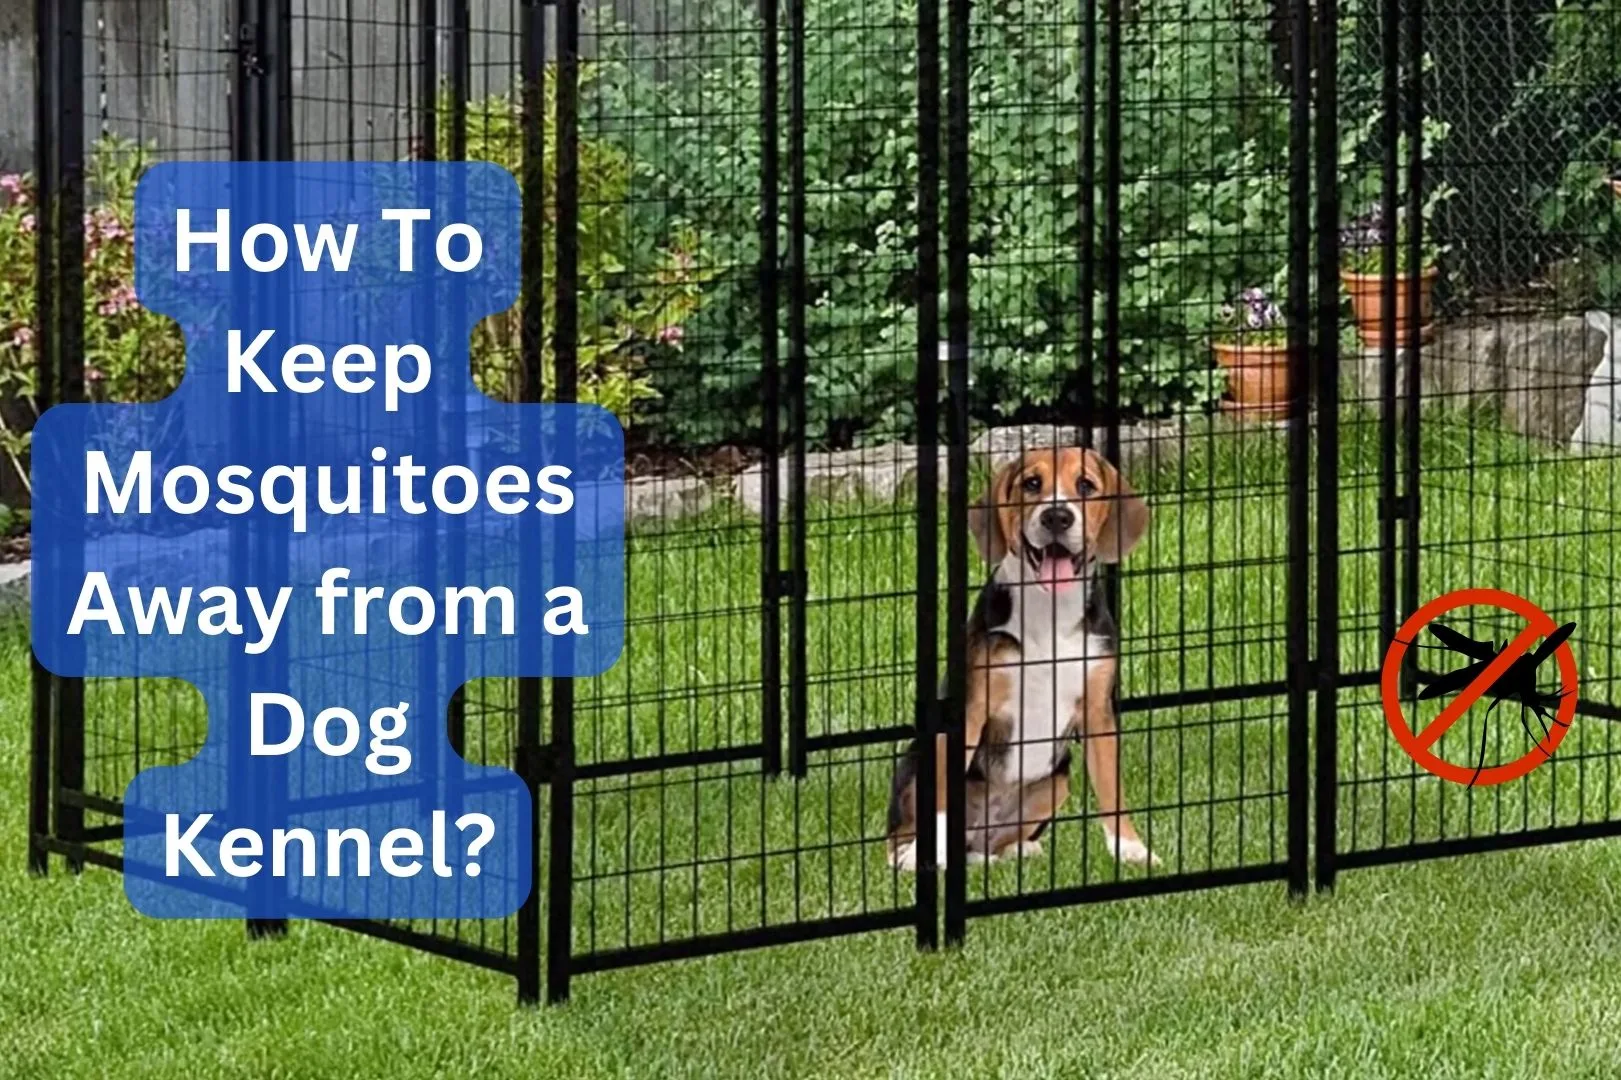 How To Keep Mosquitoes Away from a Dog Kennel